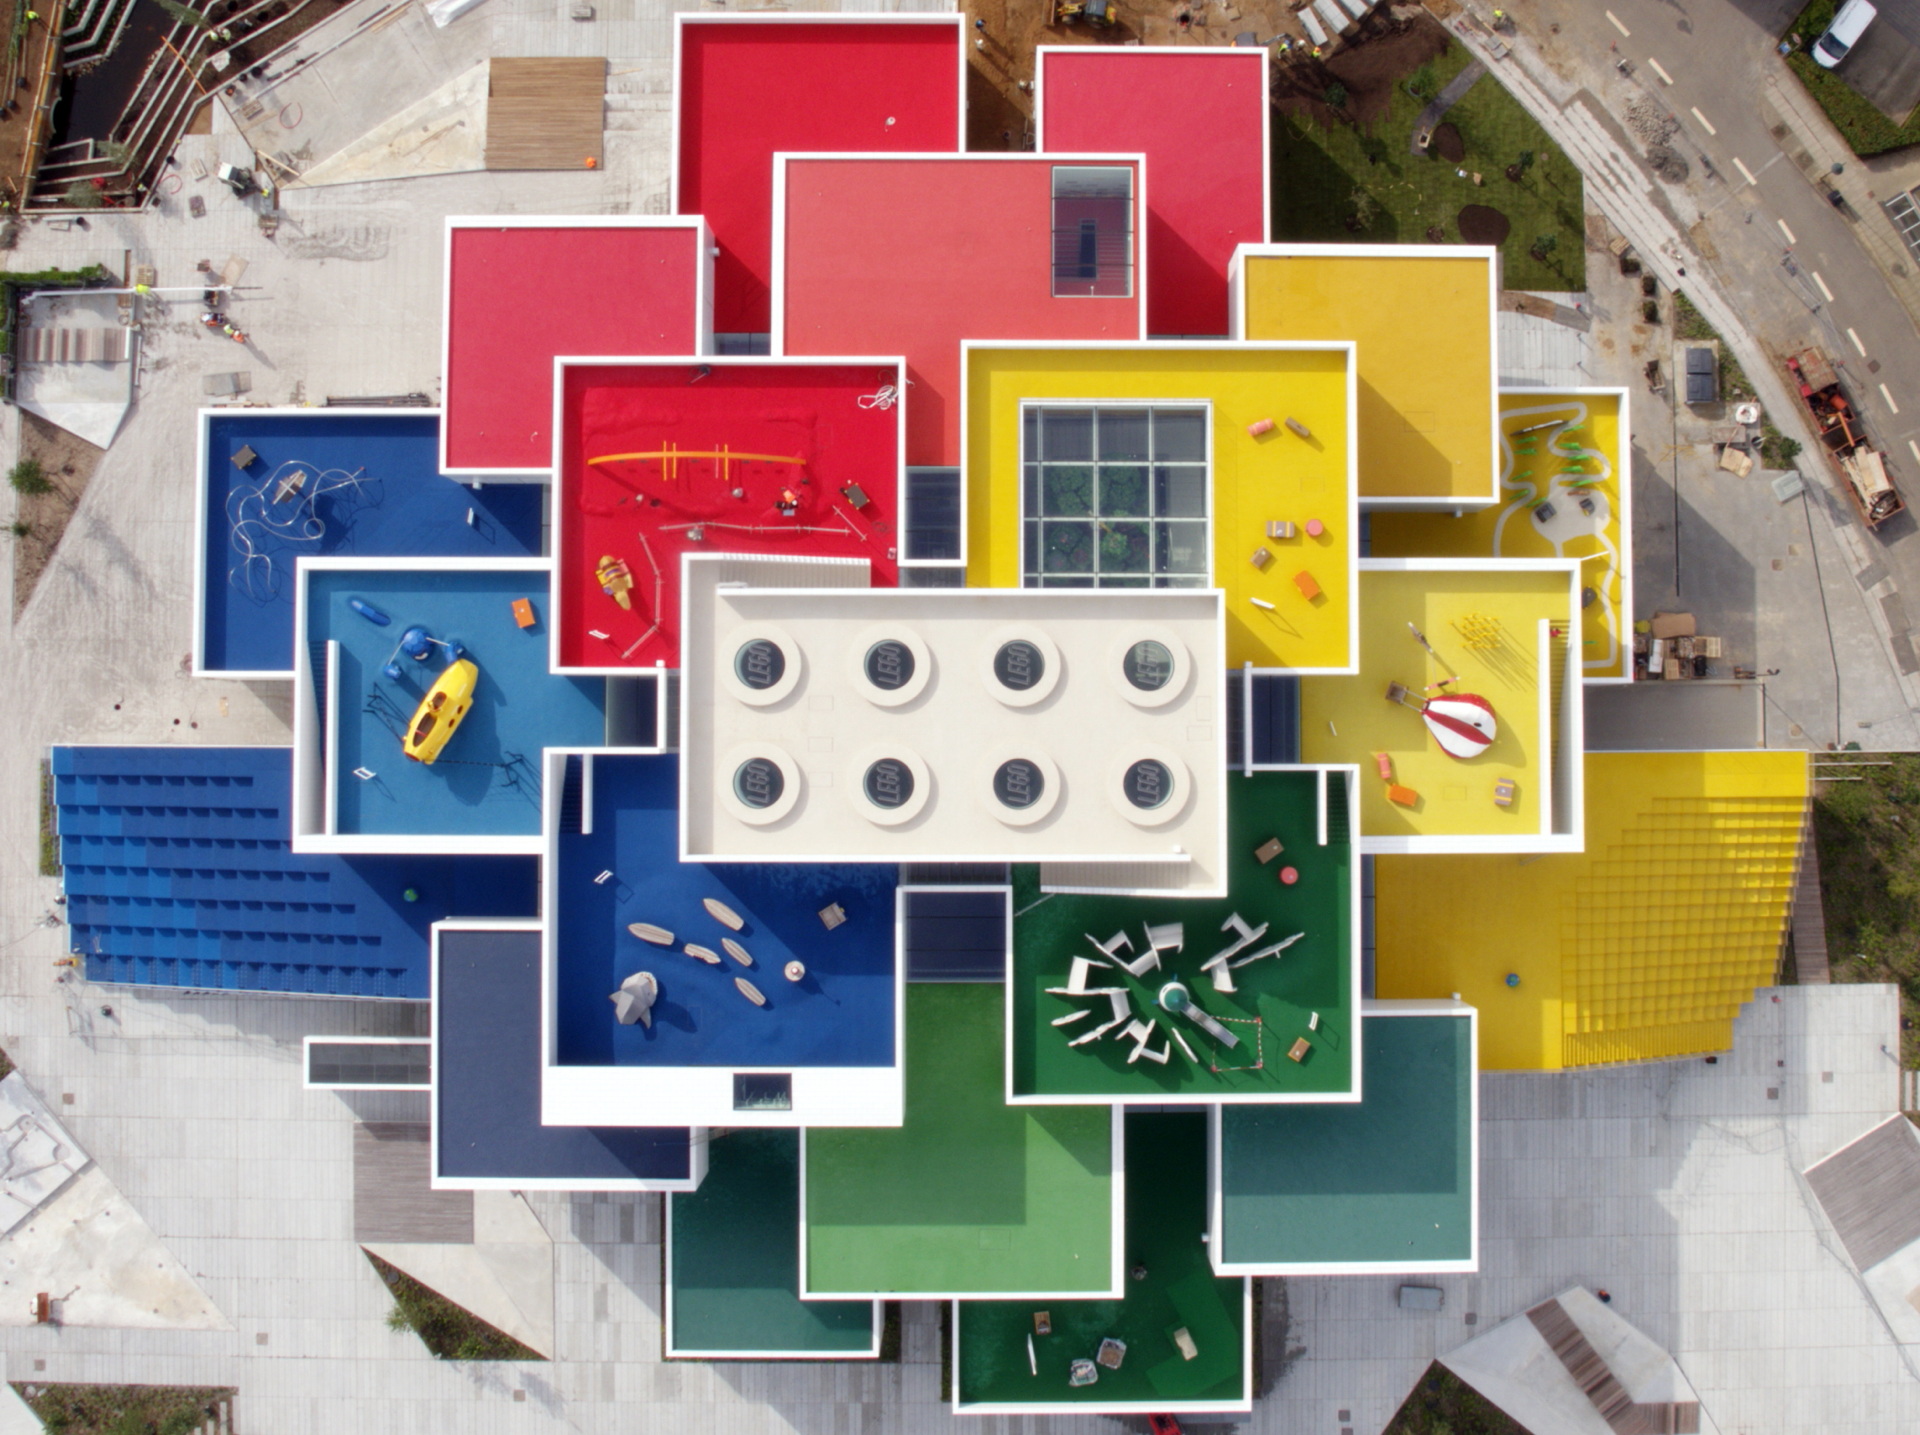 The LEGO House designed by BIG has in Denmark | Livegreenblog